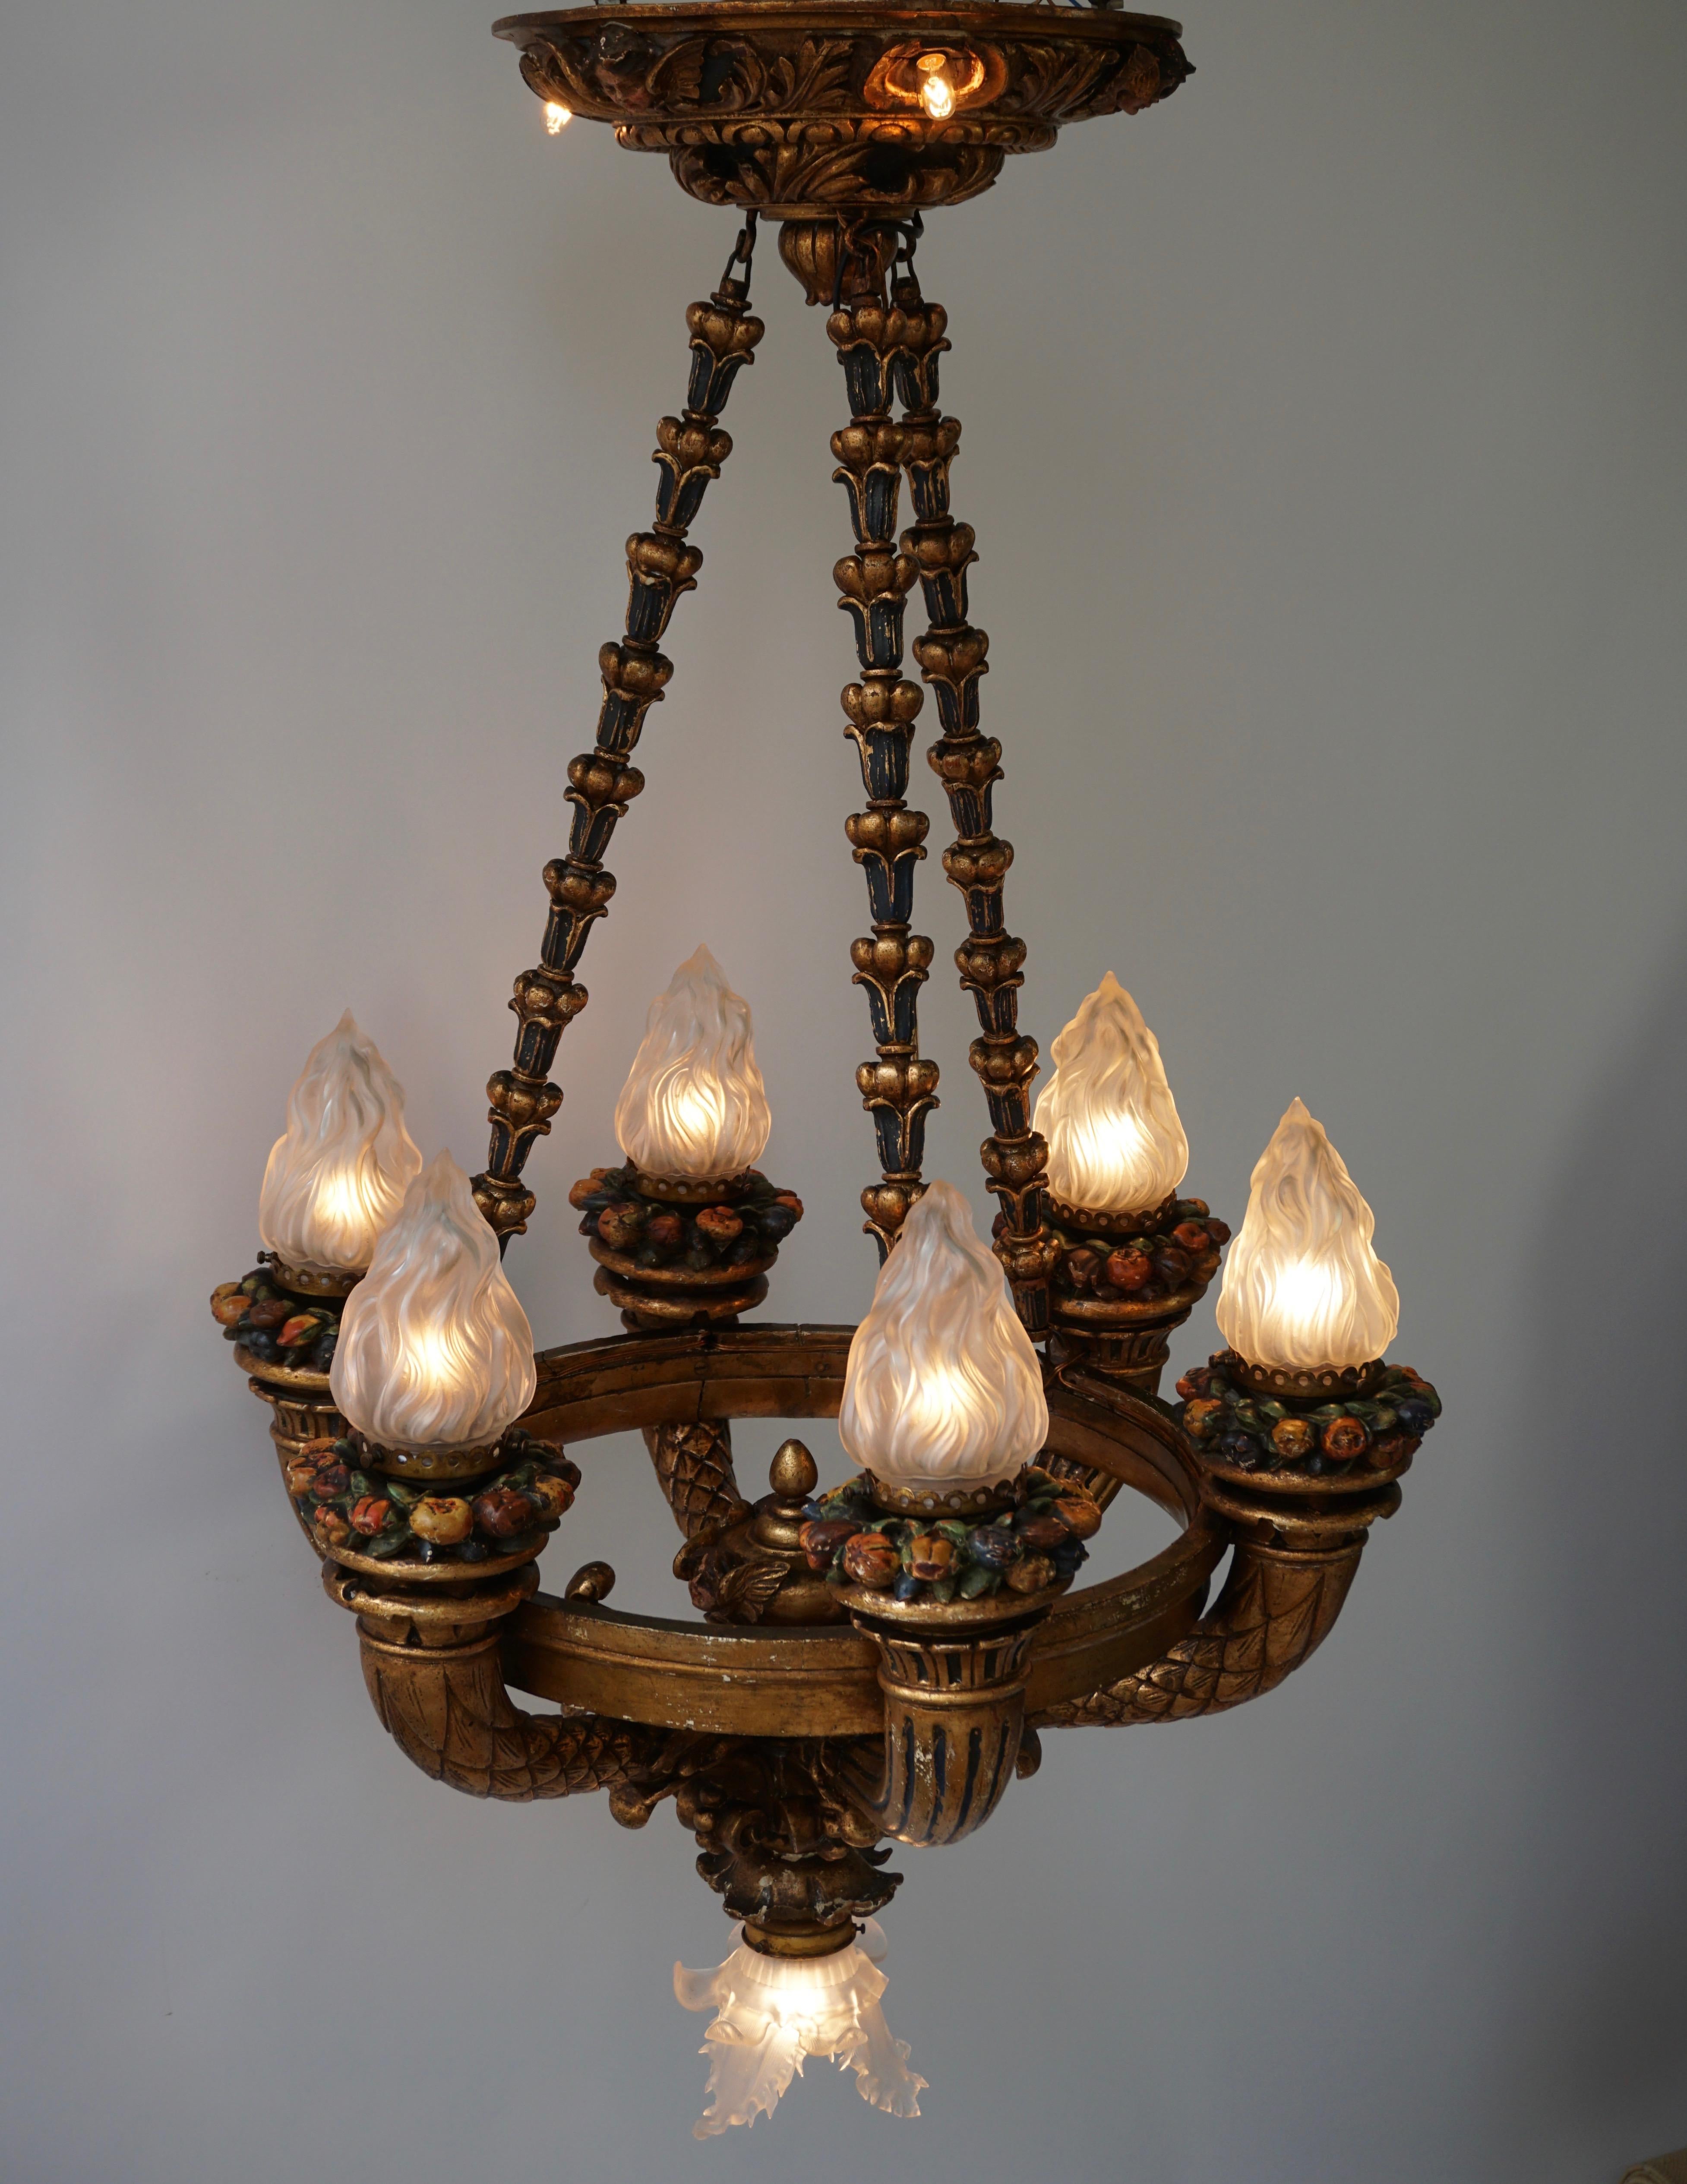 19th Century Wonderful Italian Giltwood Cherubs Putti and Painted Fruit Torch Chandelier For Sale